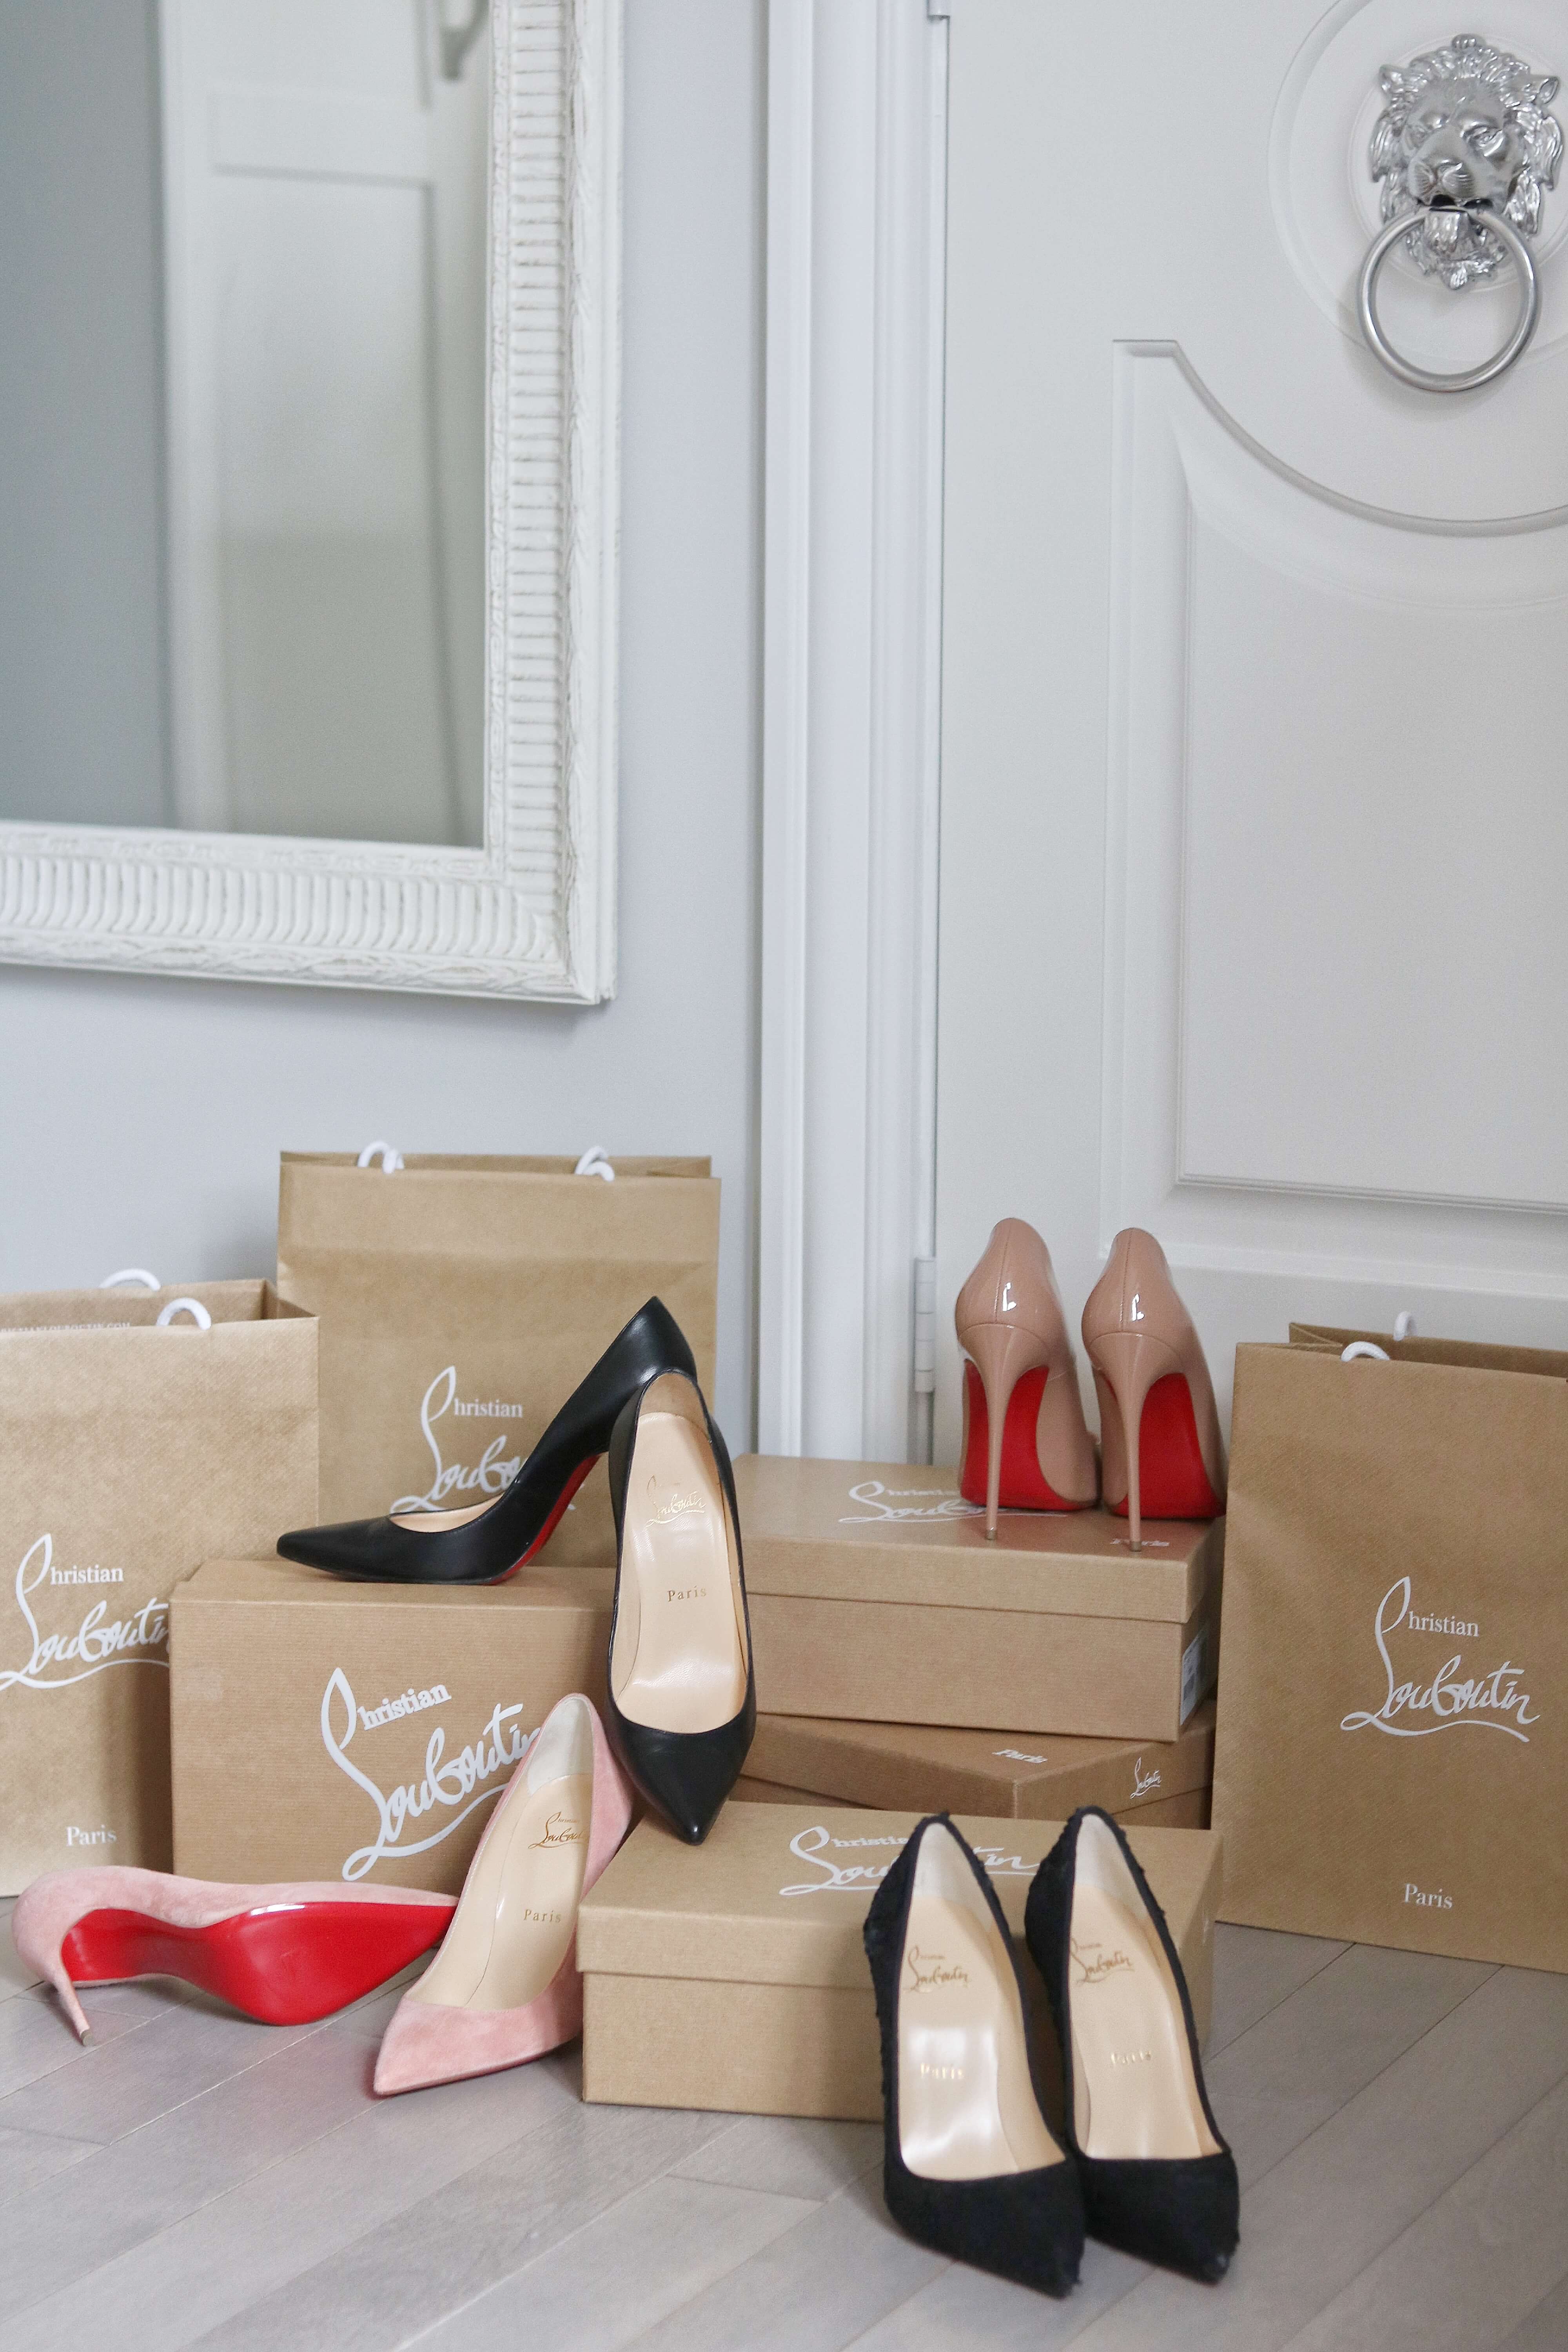 Tips on How to Take Care of Christian Louboutin Shoes sparkleshinylove